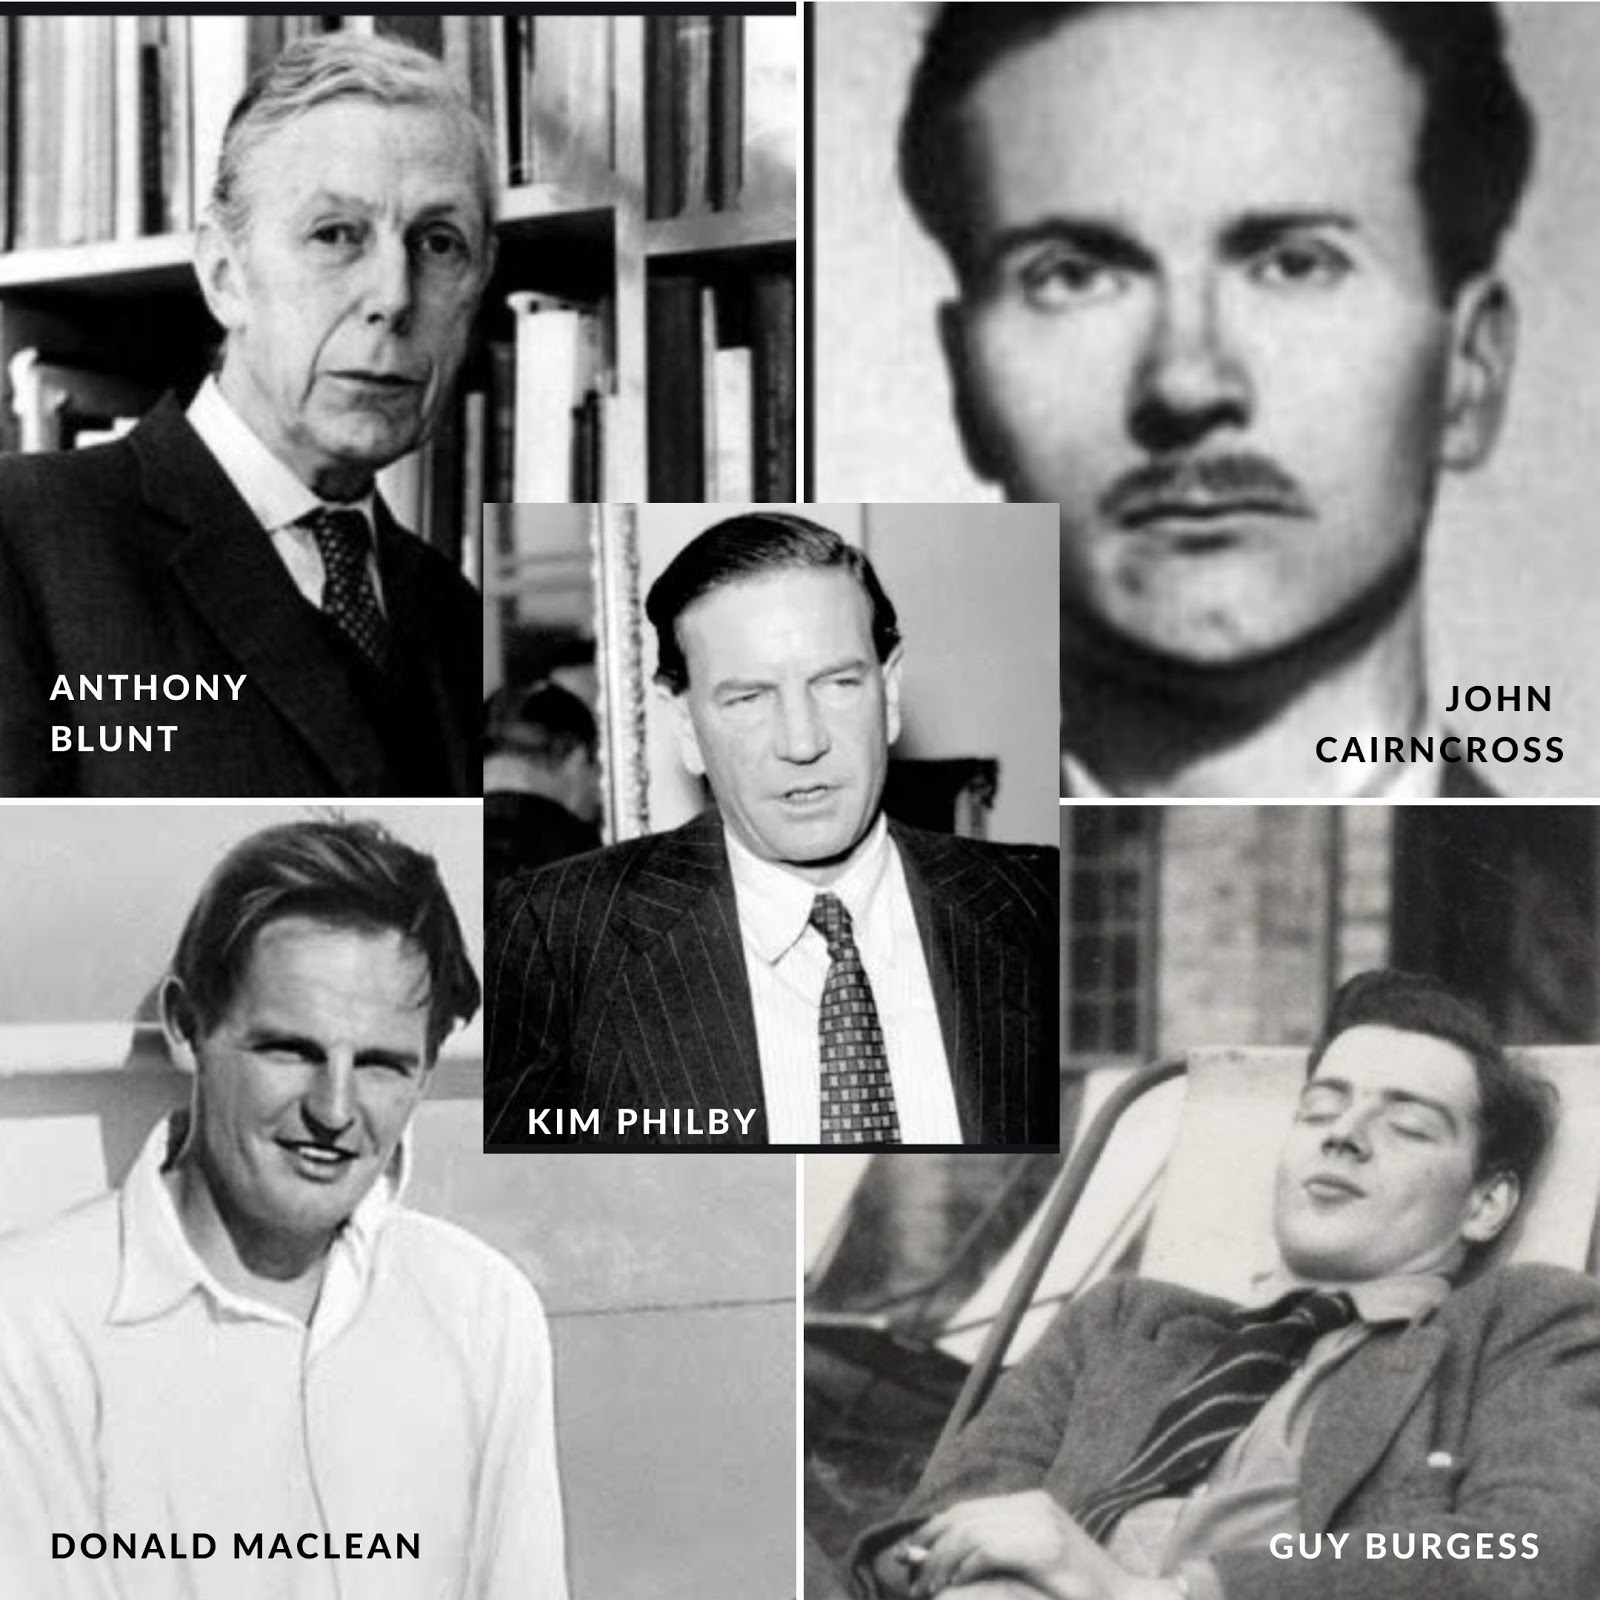 The Cambridge Five: Anthony Blunt, John Cairncross, Guy Burgess, Kim Philby and Donald Maclean